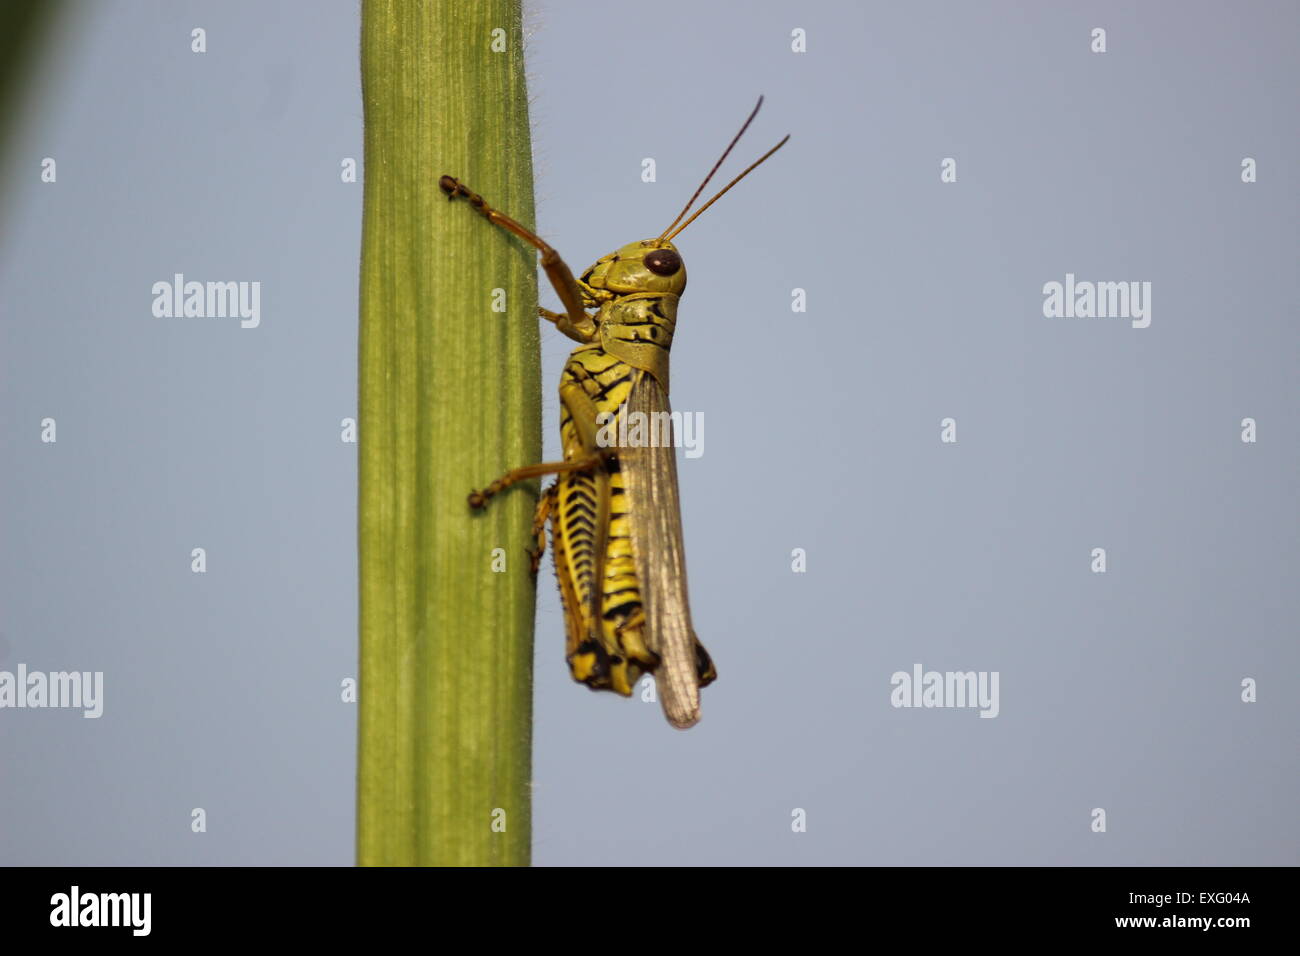 Grasshopper hanging out on stalk in Homosassa, Florida, USA. Stock Photo